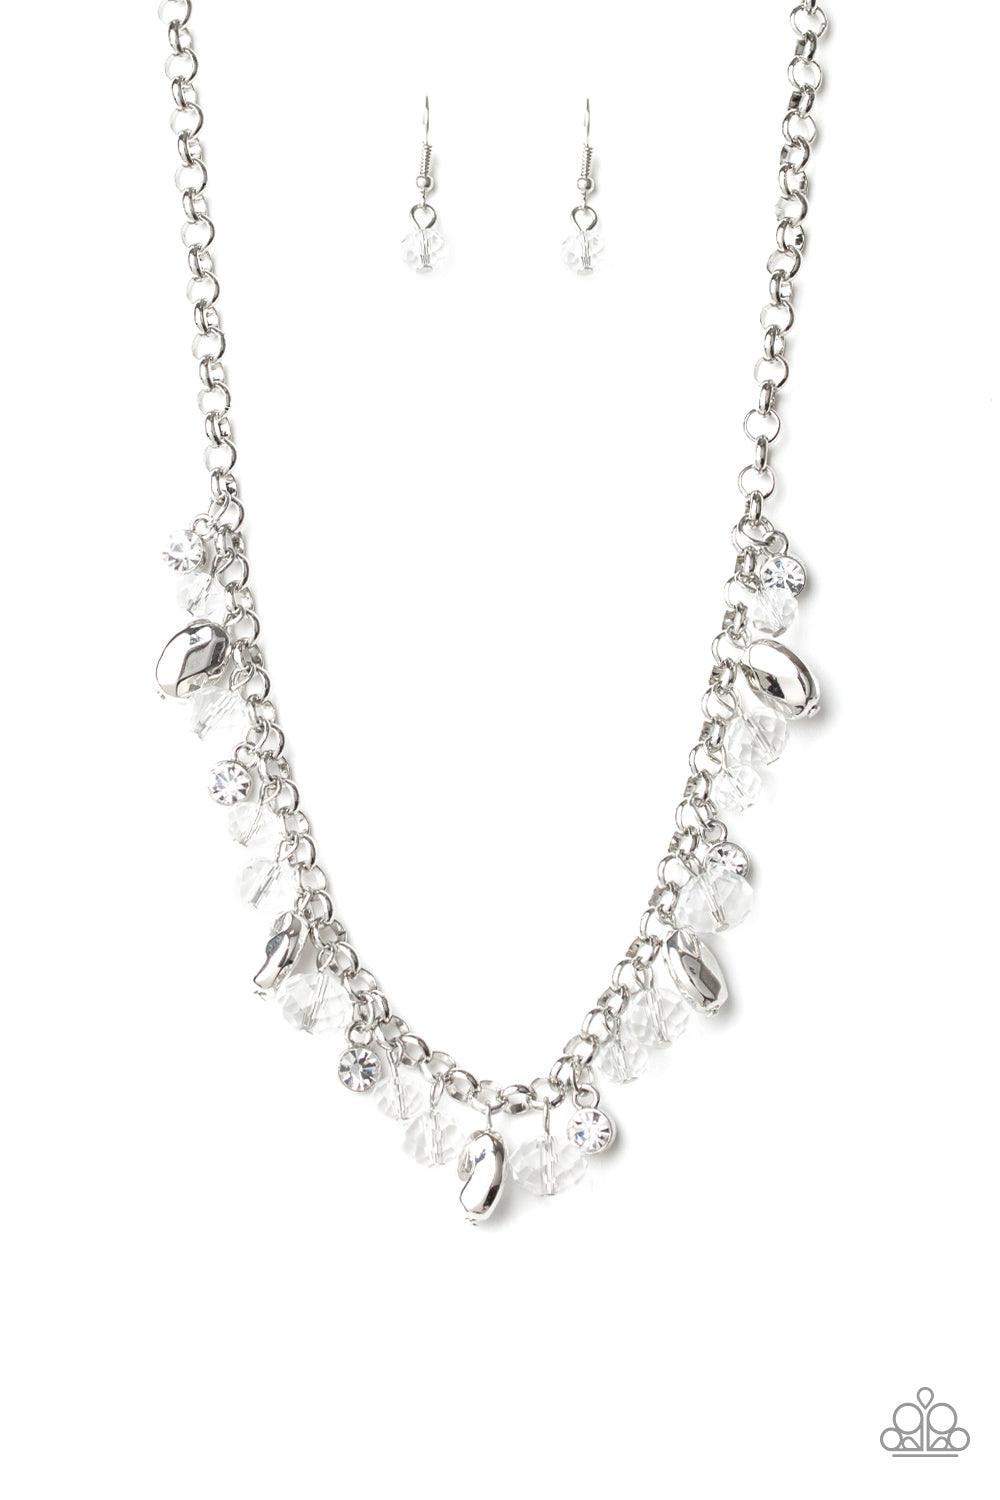 Paparazzi Accessories Downstage Dazzle - White A glittery collection of sparking white rhinestones, faceted silver beads, and glassy crystal-like beads dangle from a shimmery silver chain, creating a refined fringe below the collar. Features an adjustable